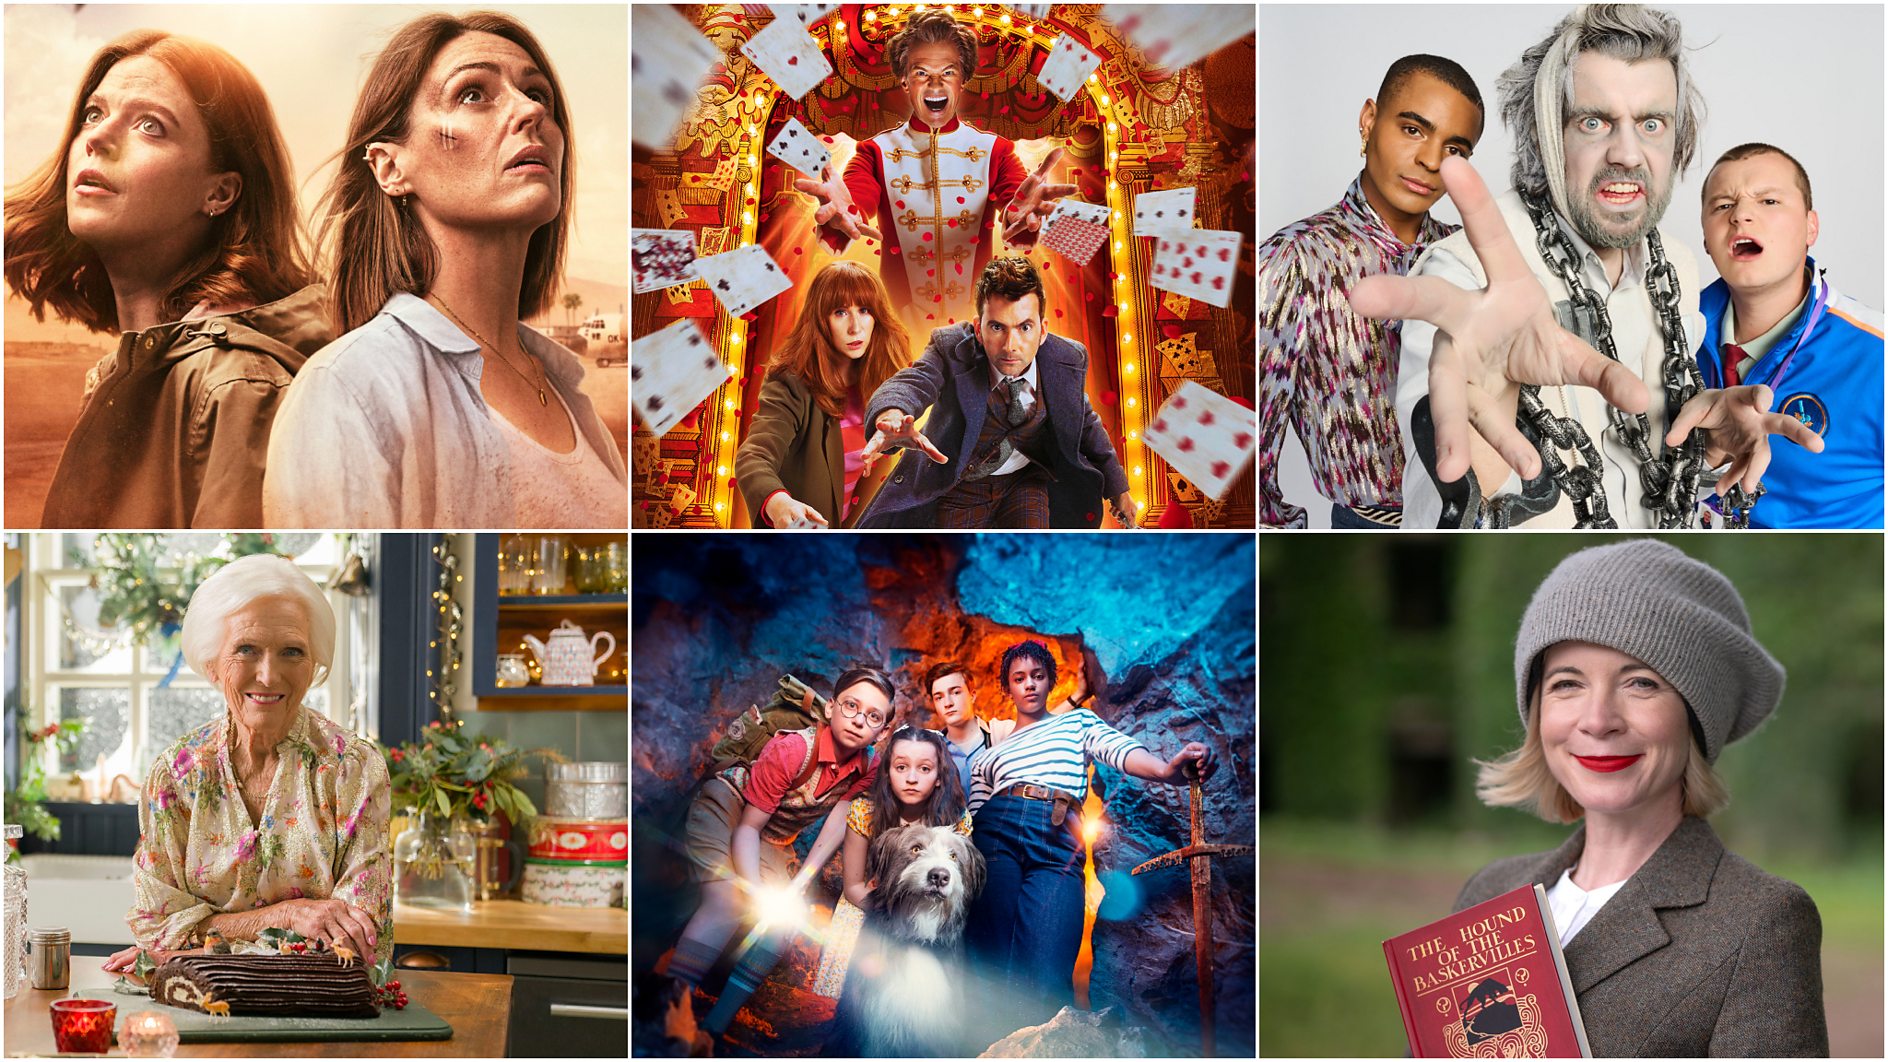 What's new to watch on BBC iPlayer?